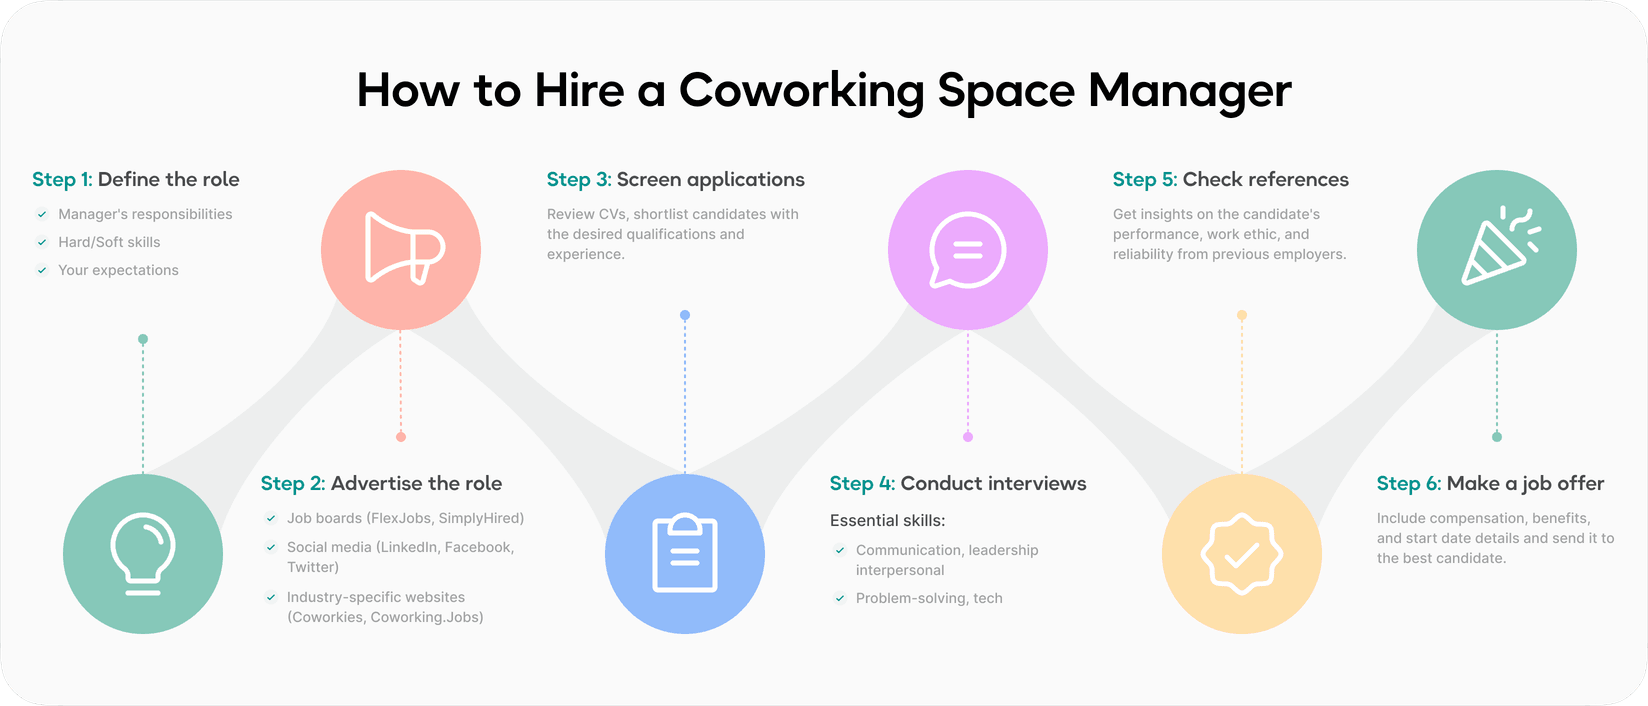 How to hire a coworking space manager - infographic